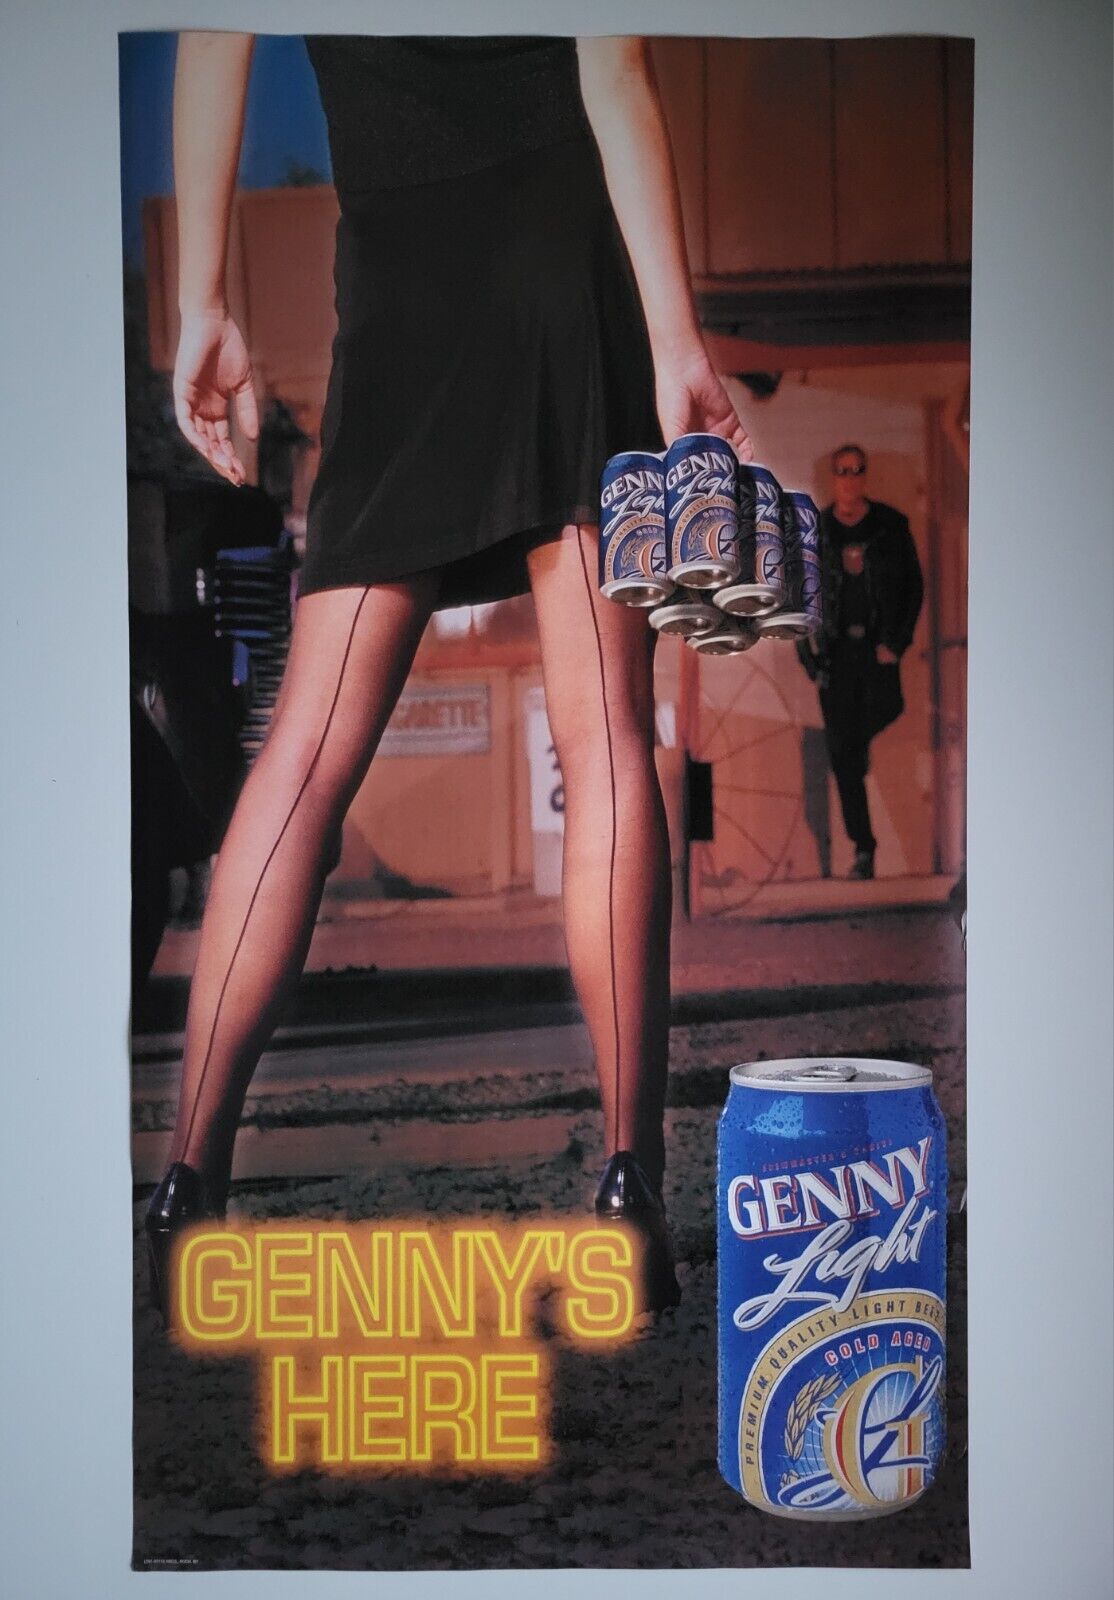 VTG 1990s GENESEE BEER POSTER 39x22 PROMO ROCHESTER NY SEXY SILK STOCKINGS RARE